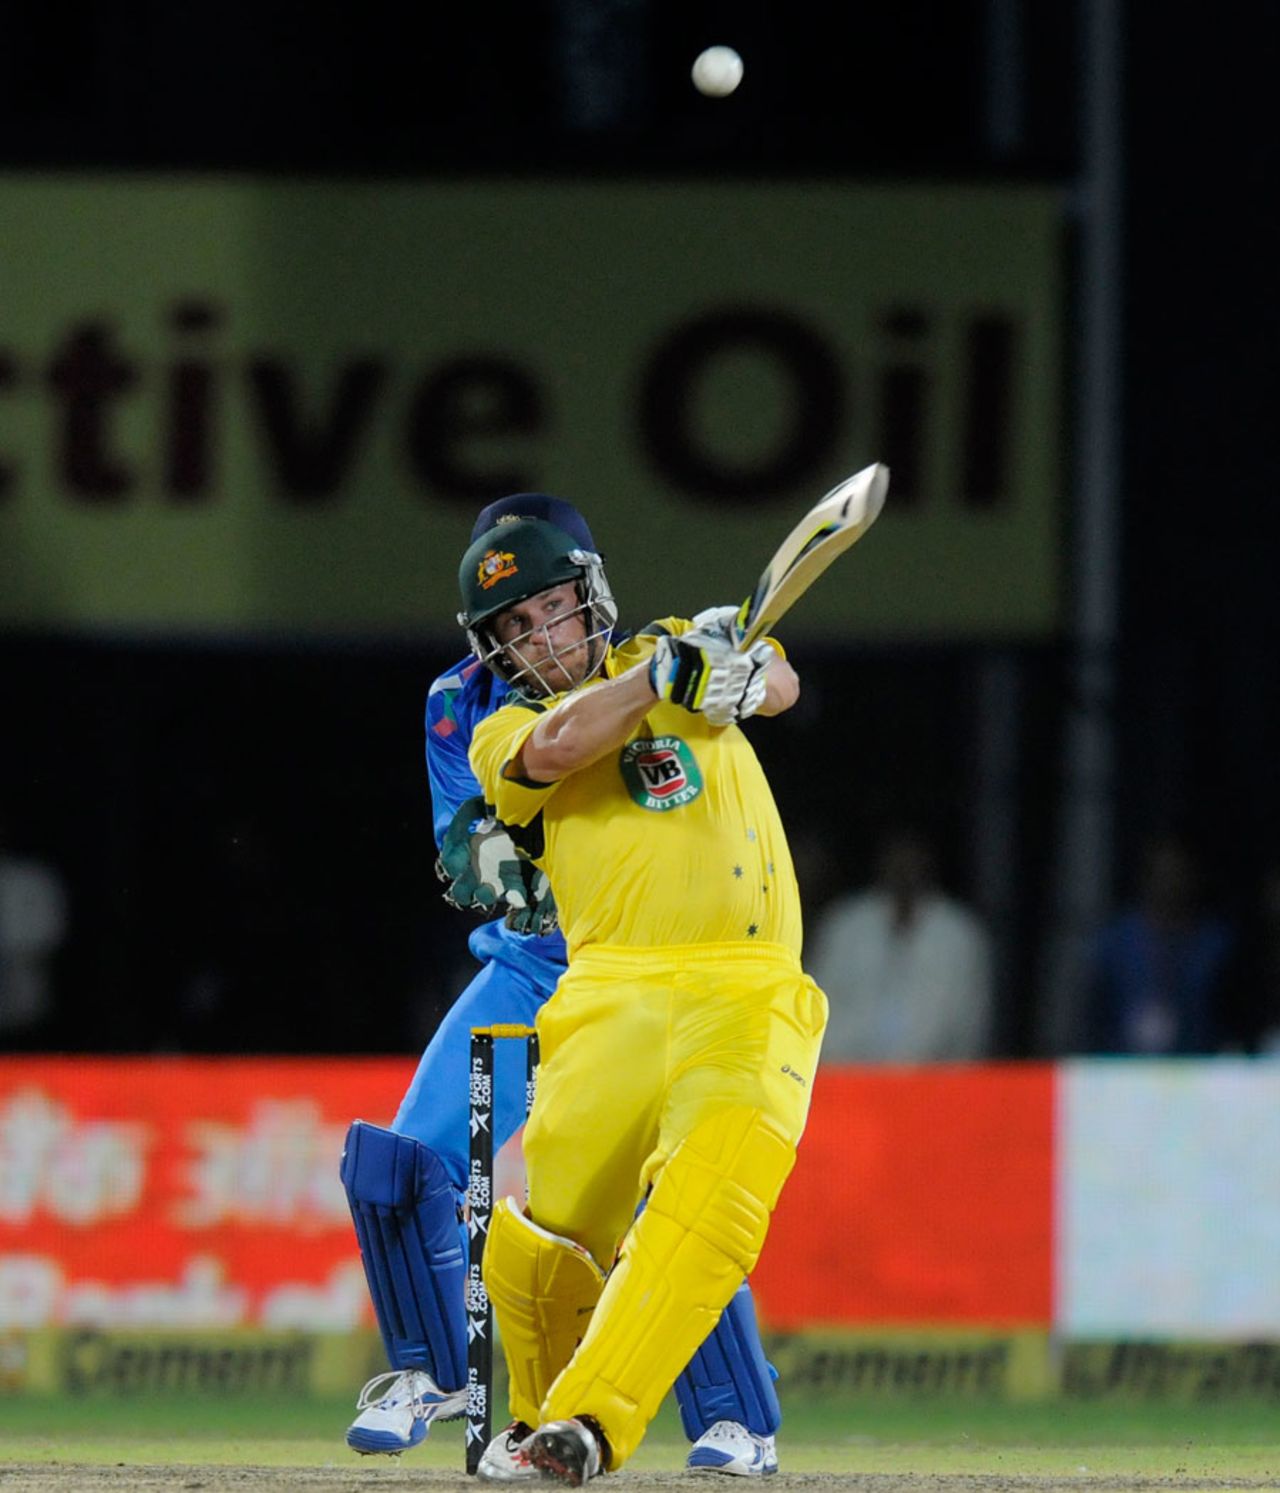 Aaron Finch clubs one over the leg side boundary, India v Australia, one-off T20, Rajkot, October 10, 2013